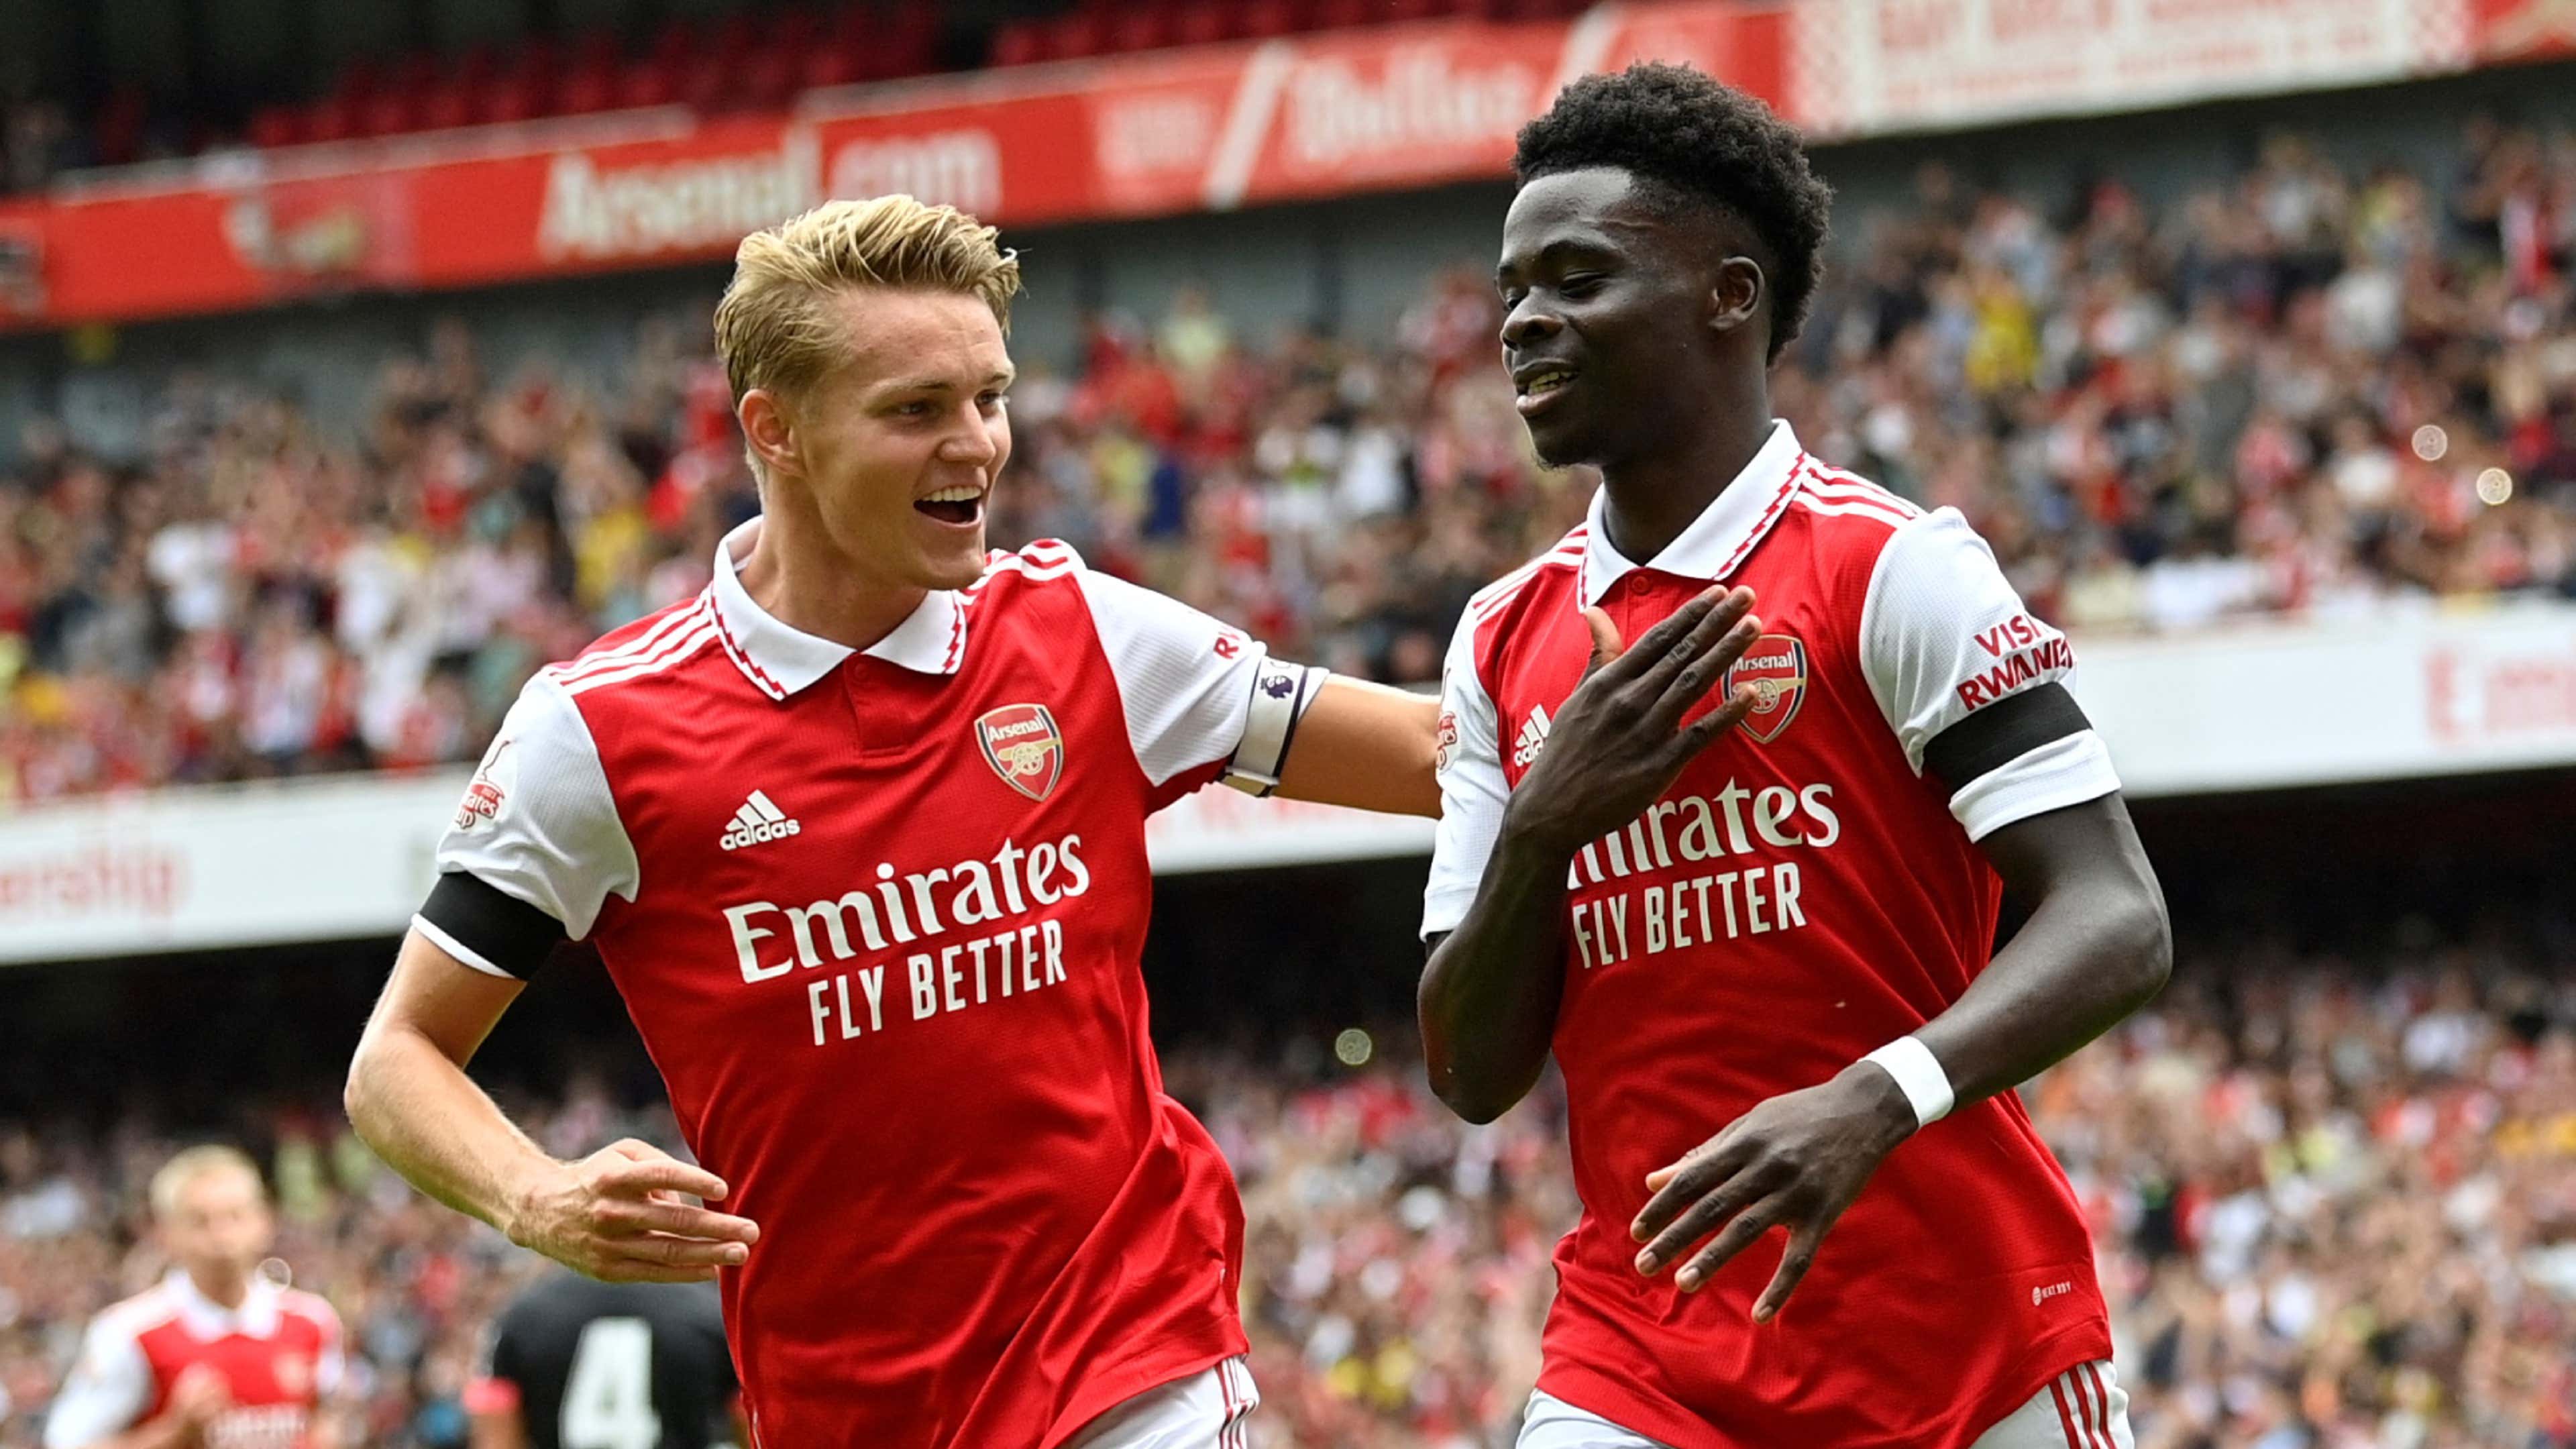 Arsenal vs Fulham: How to watch on TV live stream, kick-off time, team news  & predictions